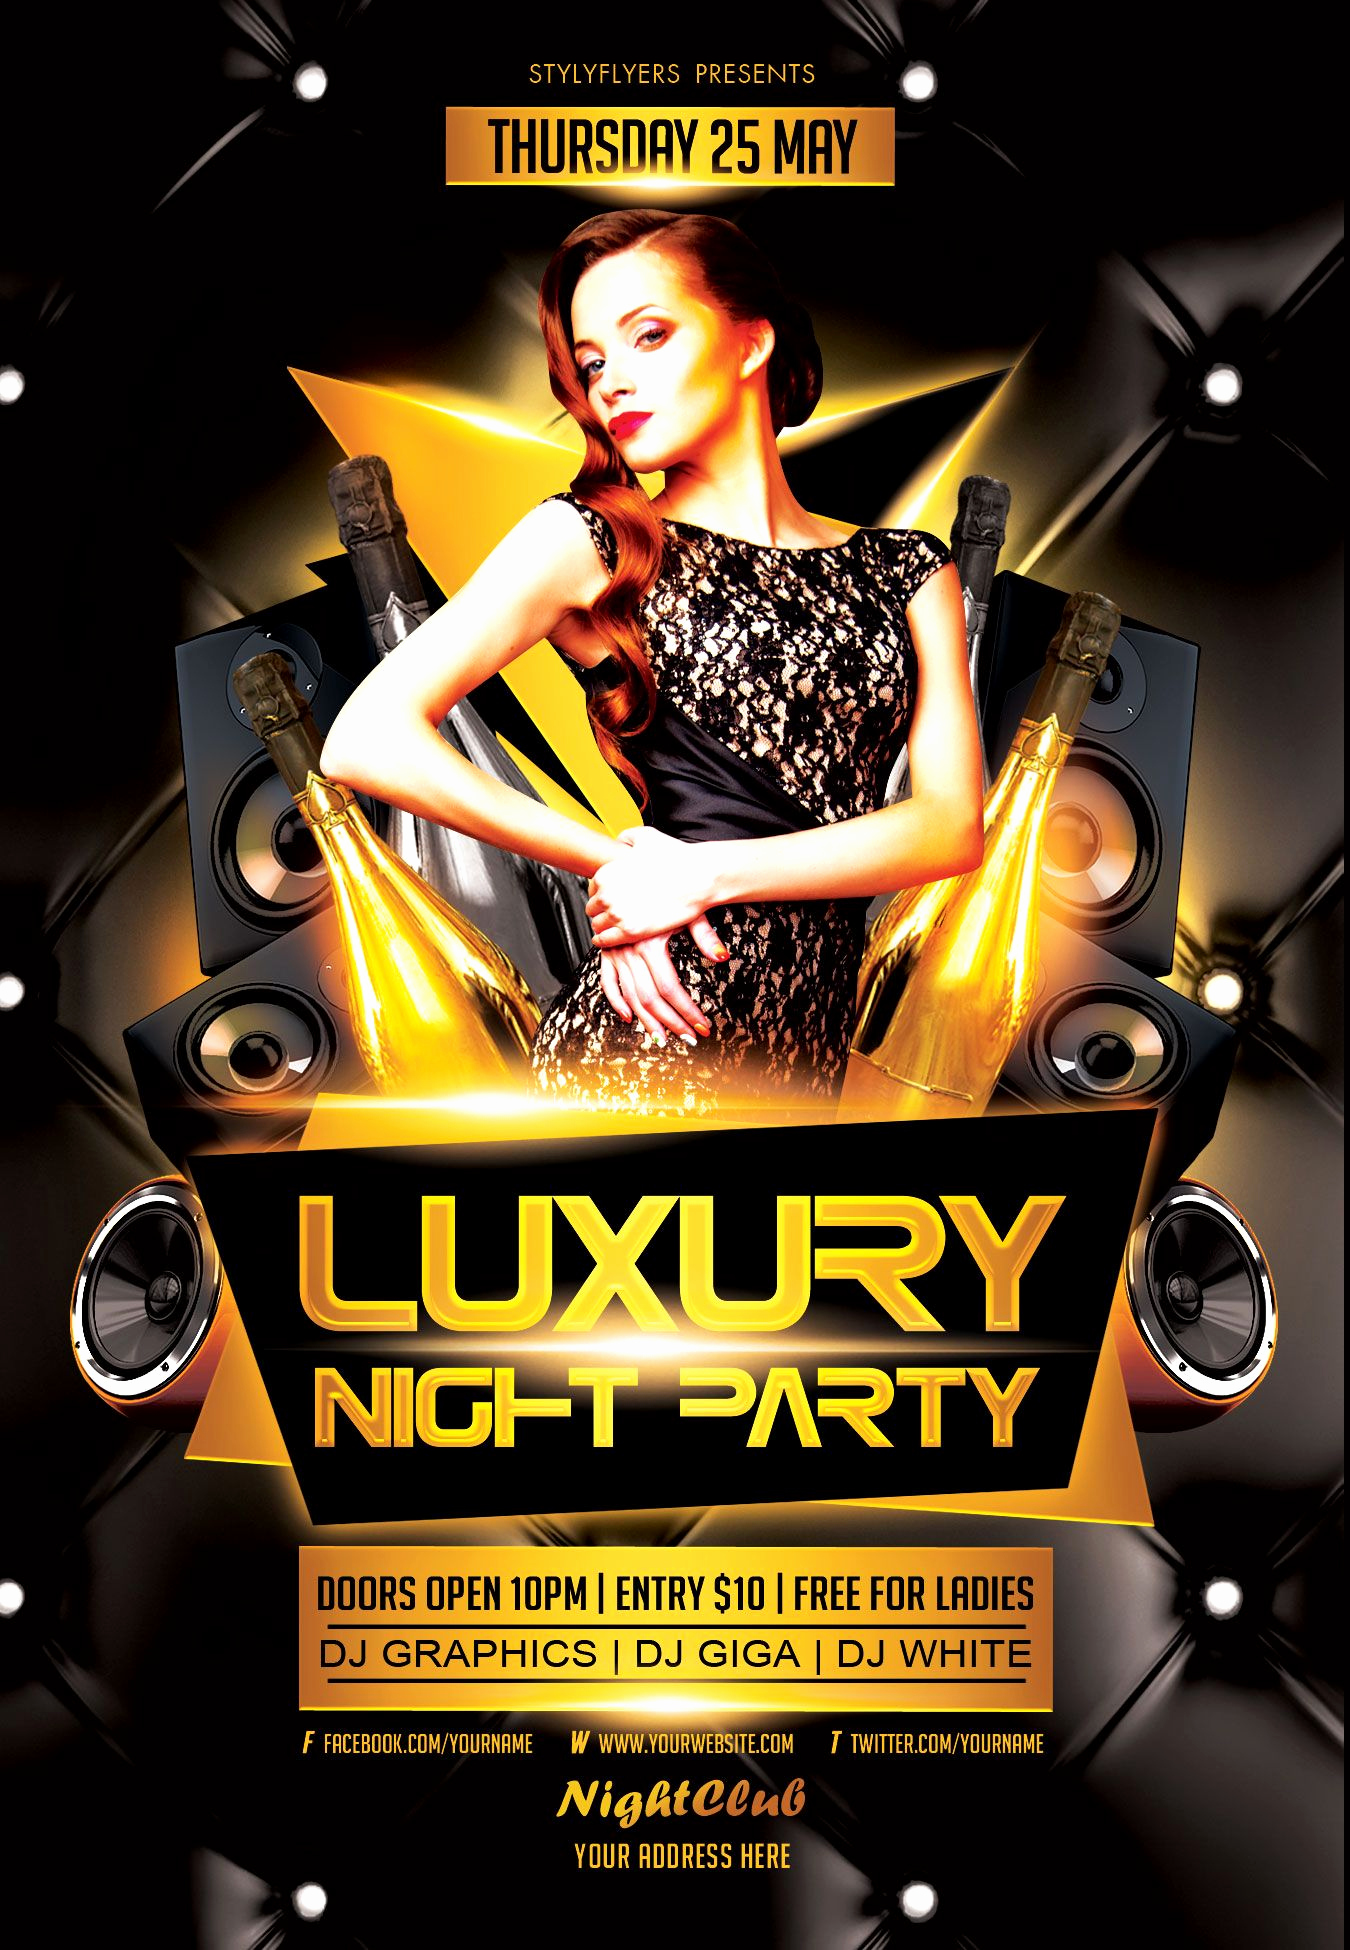 Event Flyer Templates Free Unique Free Luxury Night Party Flyer Psd Template by Styleflyer